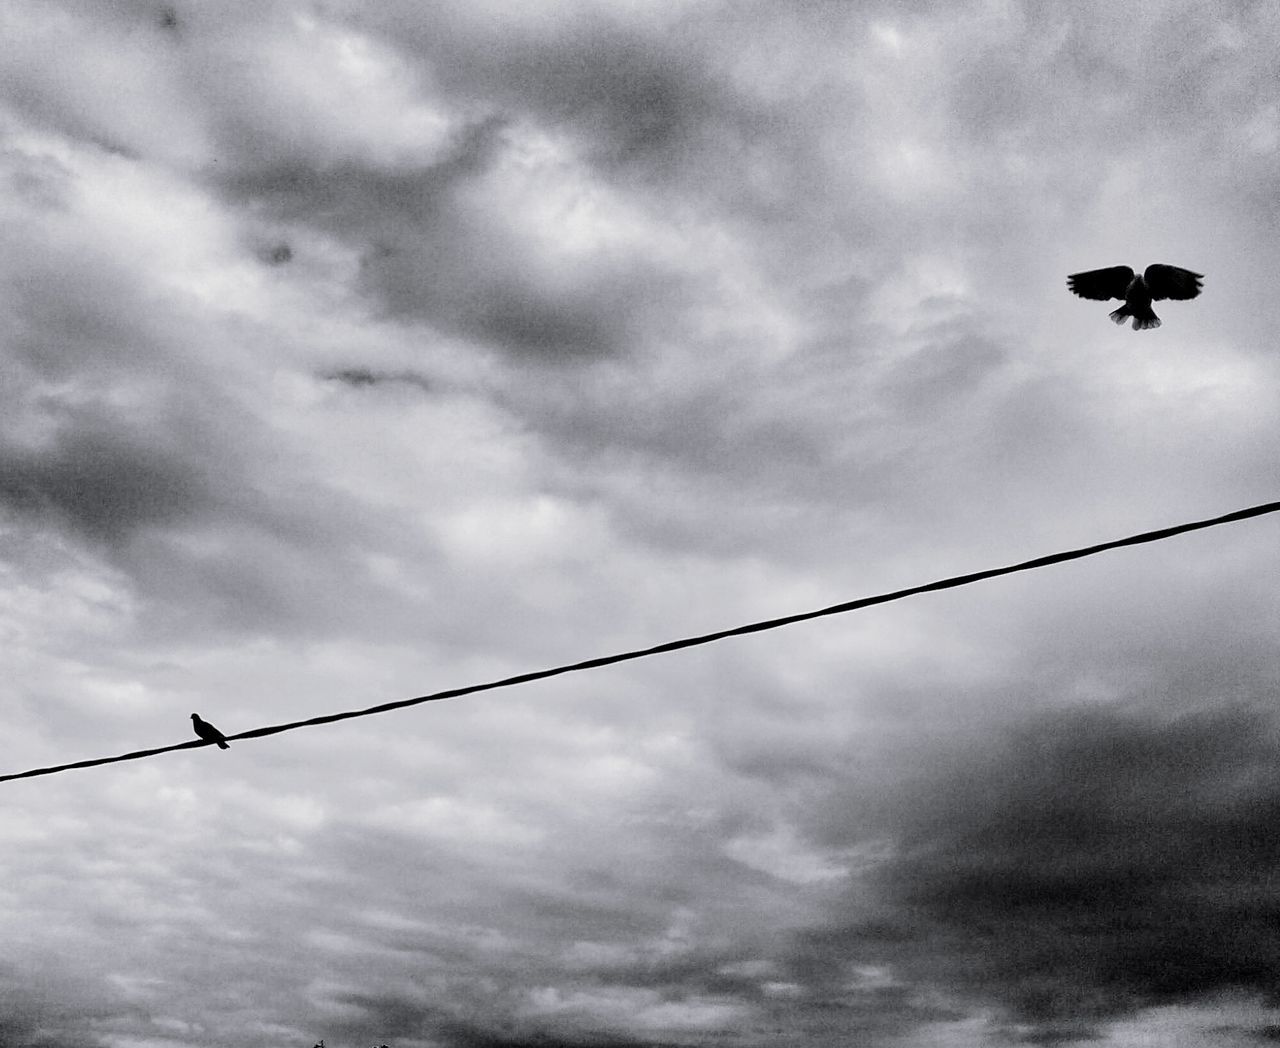 bird, low angle view, animal themes, sky, animals in the wild, wildlife, flying, cloud - sky, perching, cloudy, silhouette, flock of birds, cloud, cable, street light, nature, two animals, outdoors, power line